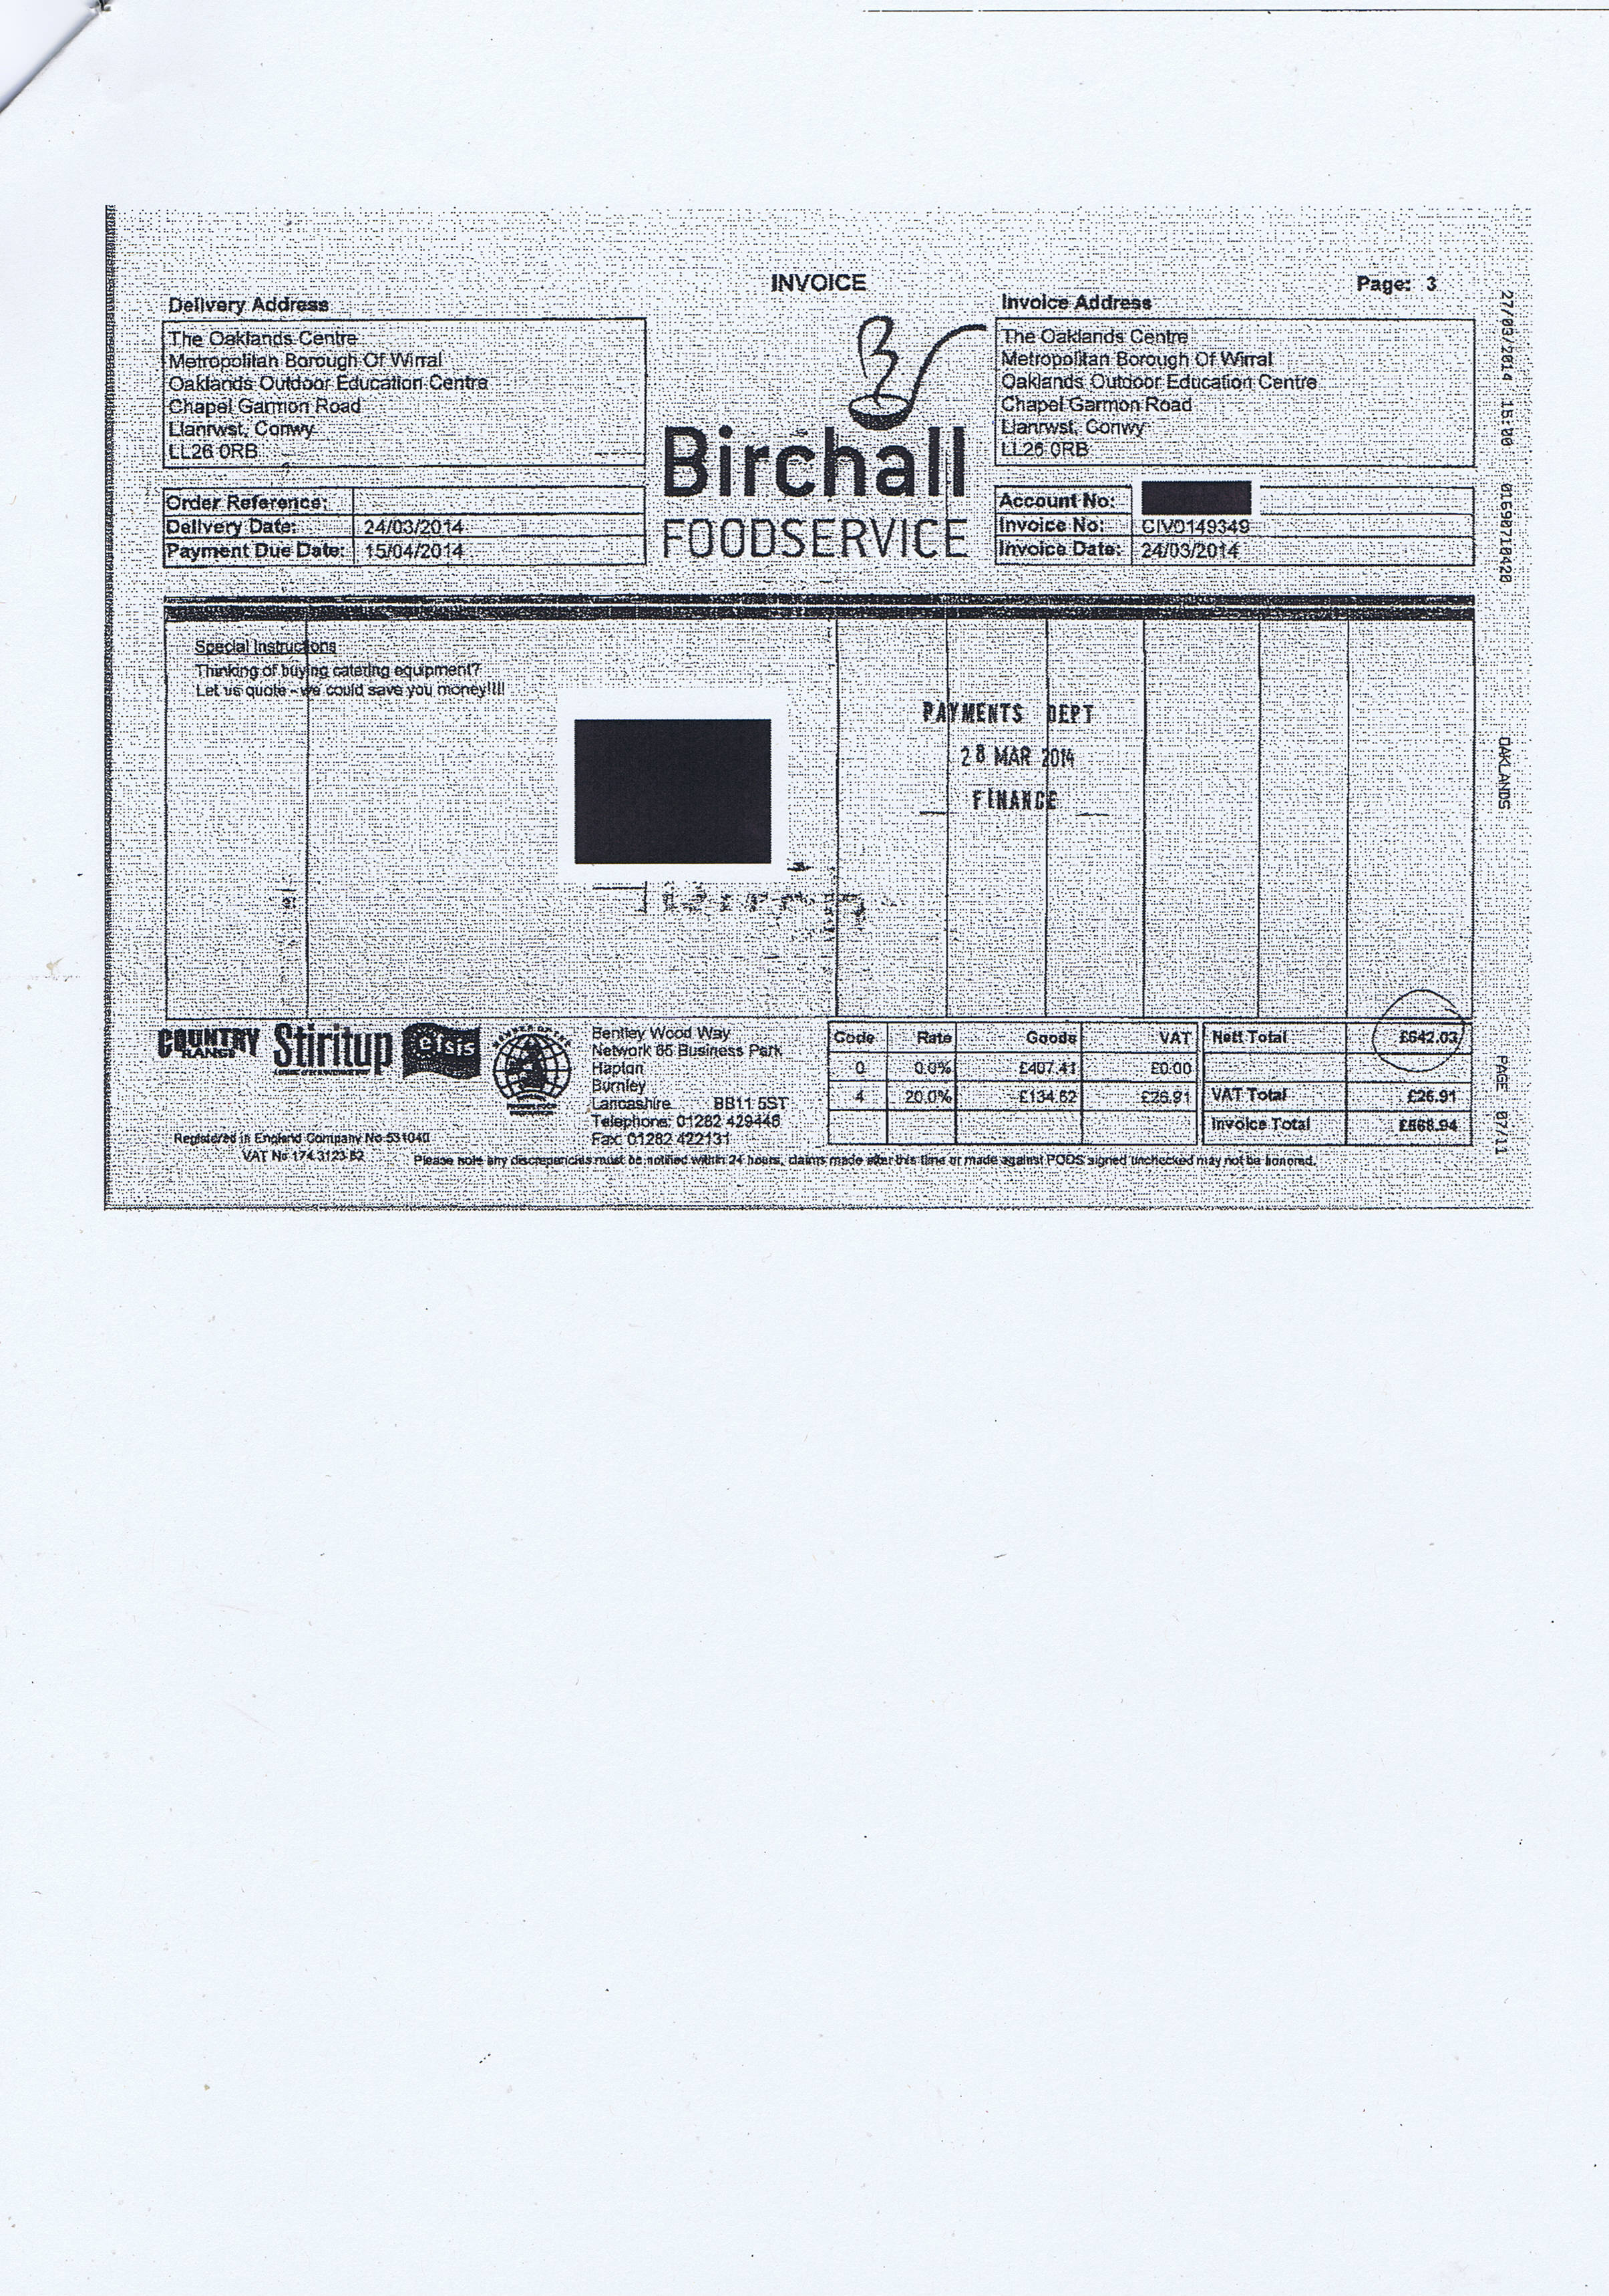 Wirral Council invoice 75 Birchall Foodservice £568.94 page 3 of 3